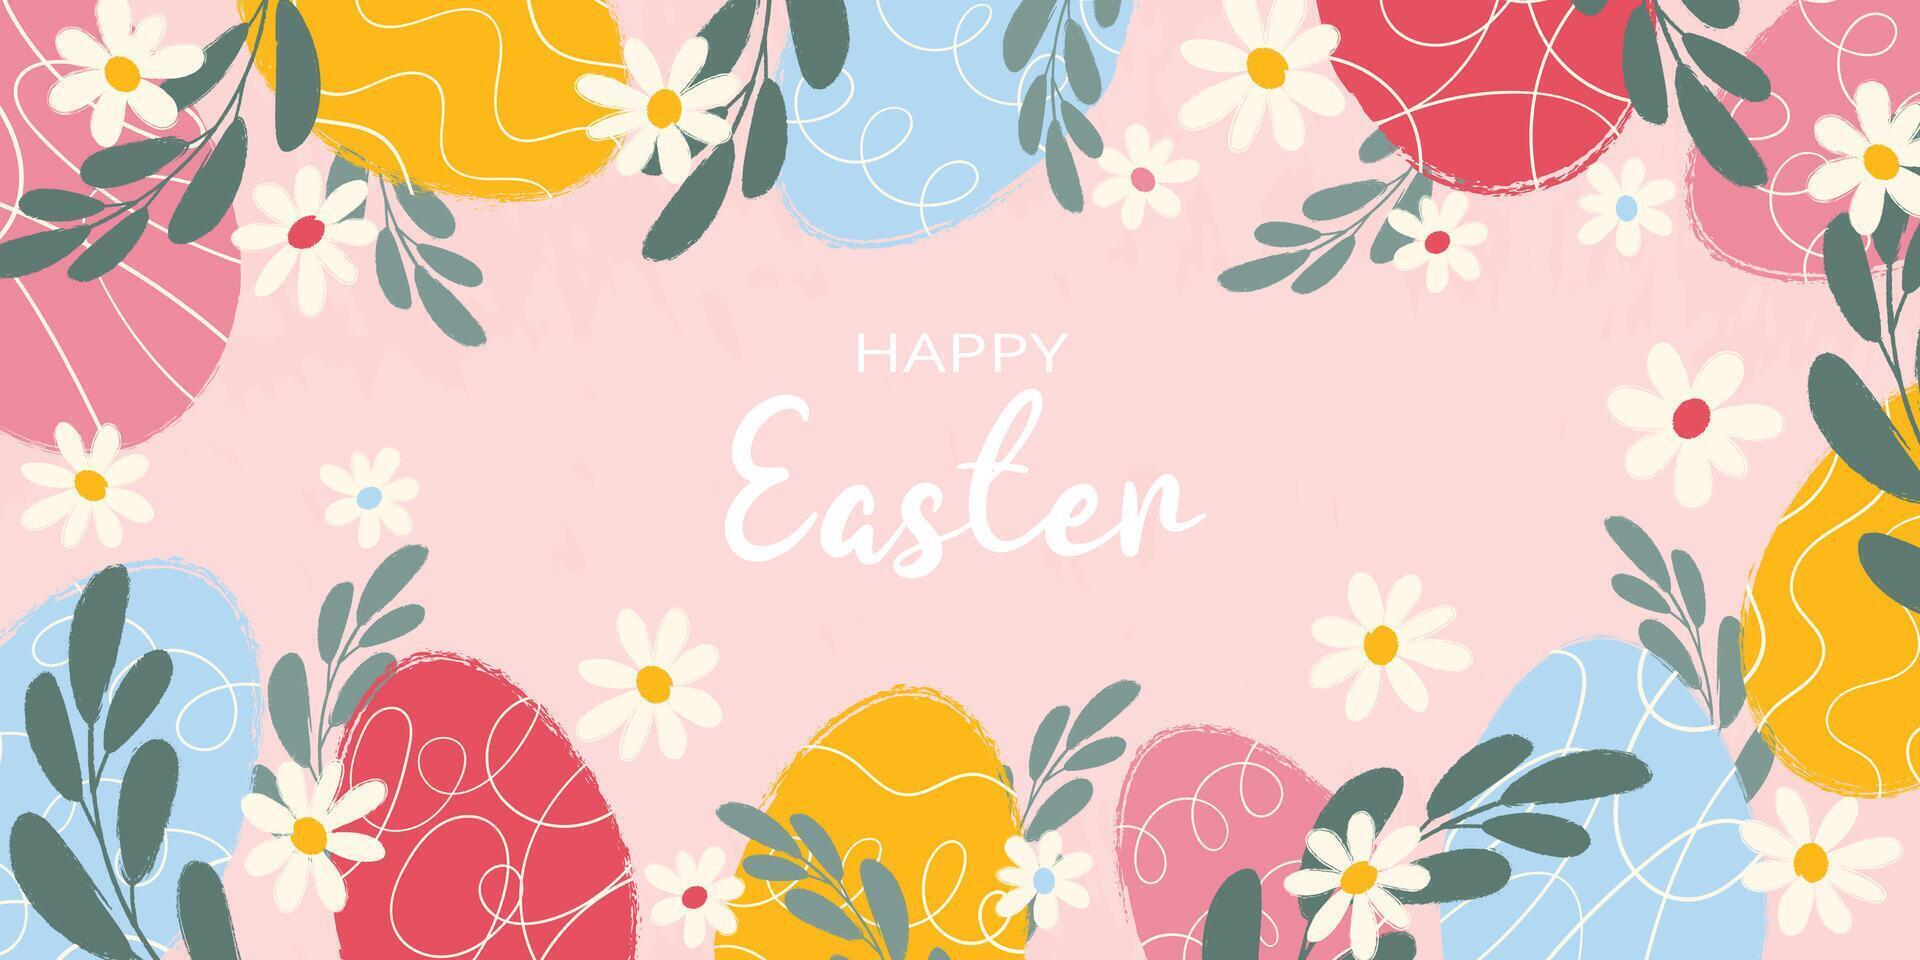 Horizontal greeting background decorated hand drawn white flowers, green branches, scribbles, colorful eggs and typography Happy Easter. Flat vector grunge textured illustration on pink backdrop.